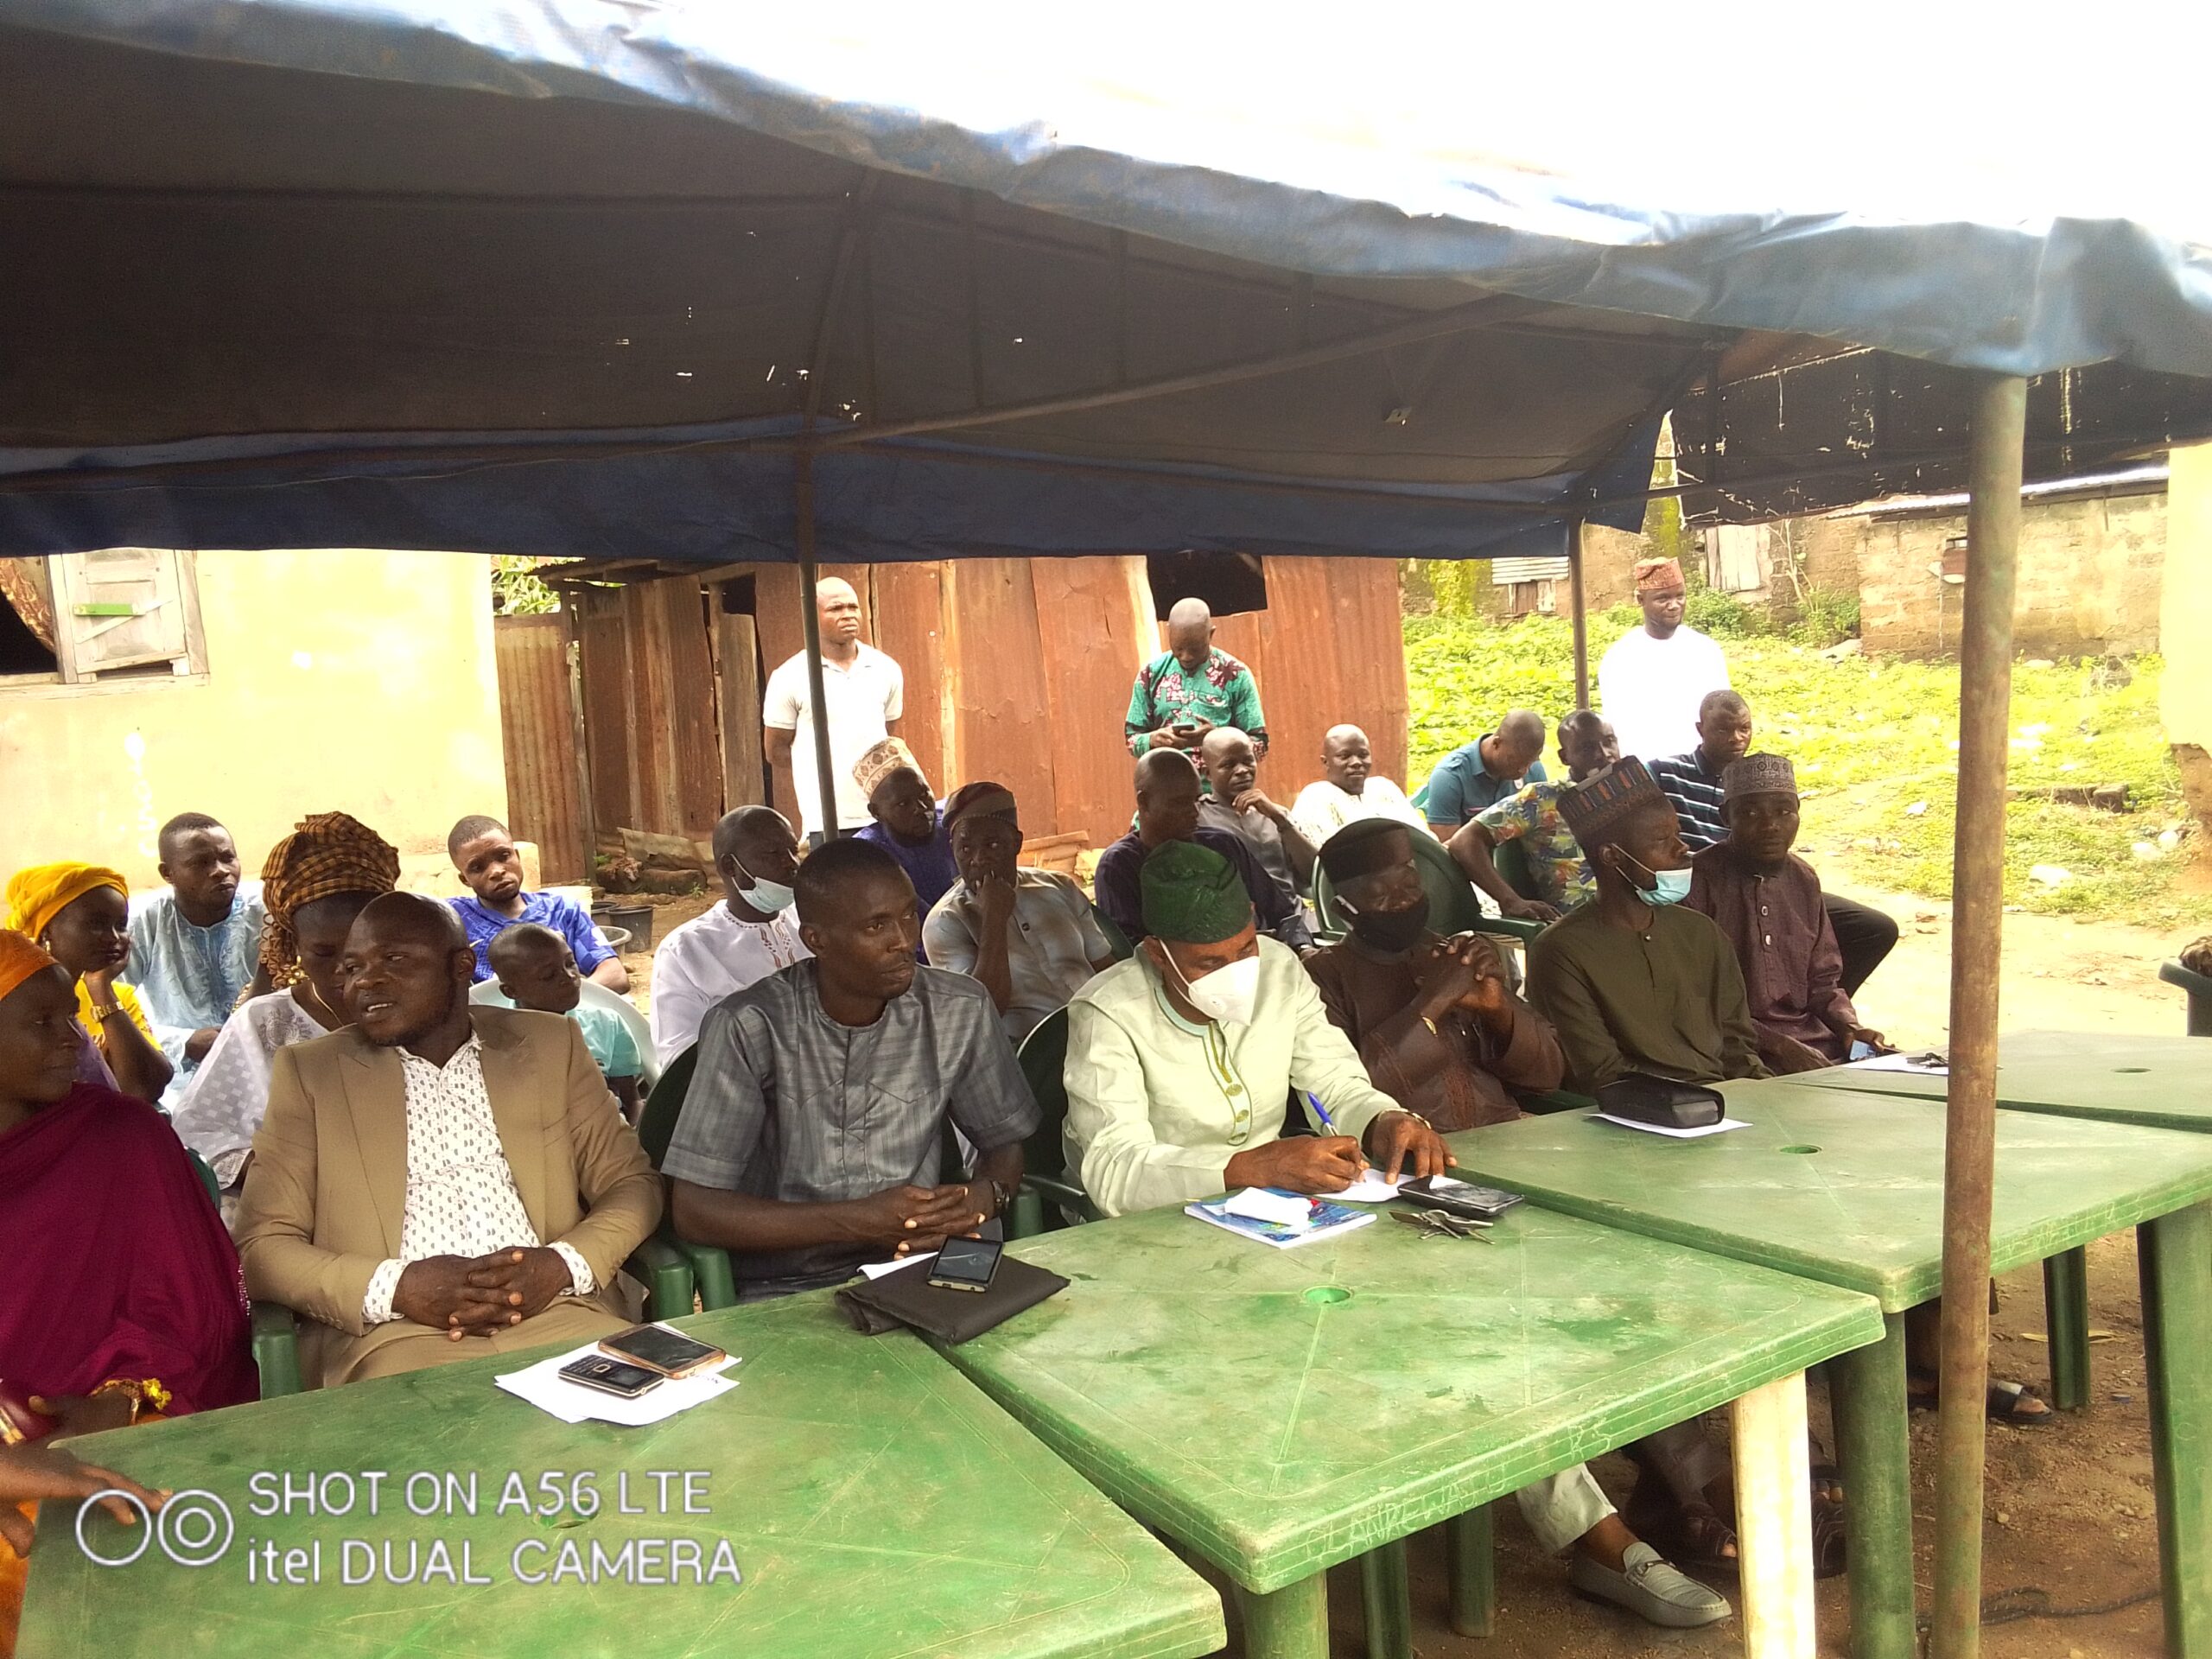 Wisdom Charity Foundation Launches In Osun, To Render Humanitarian Services To The Vulnerables